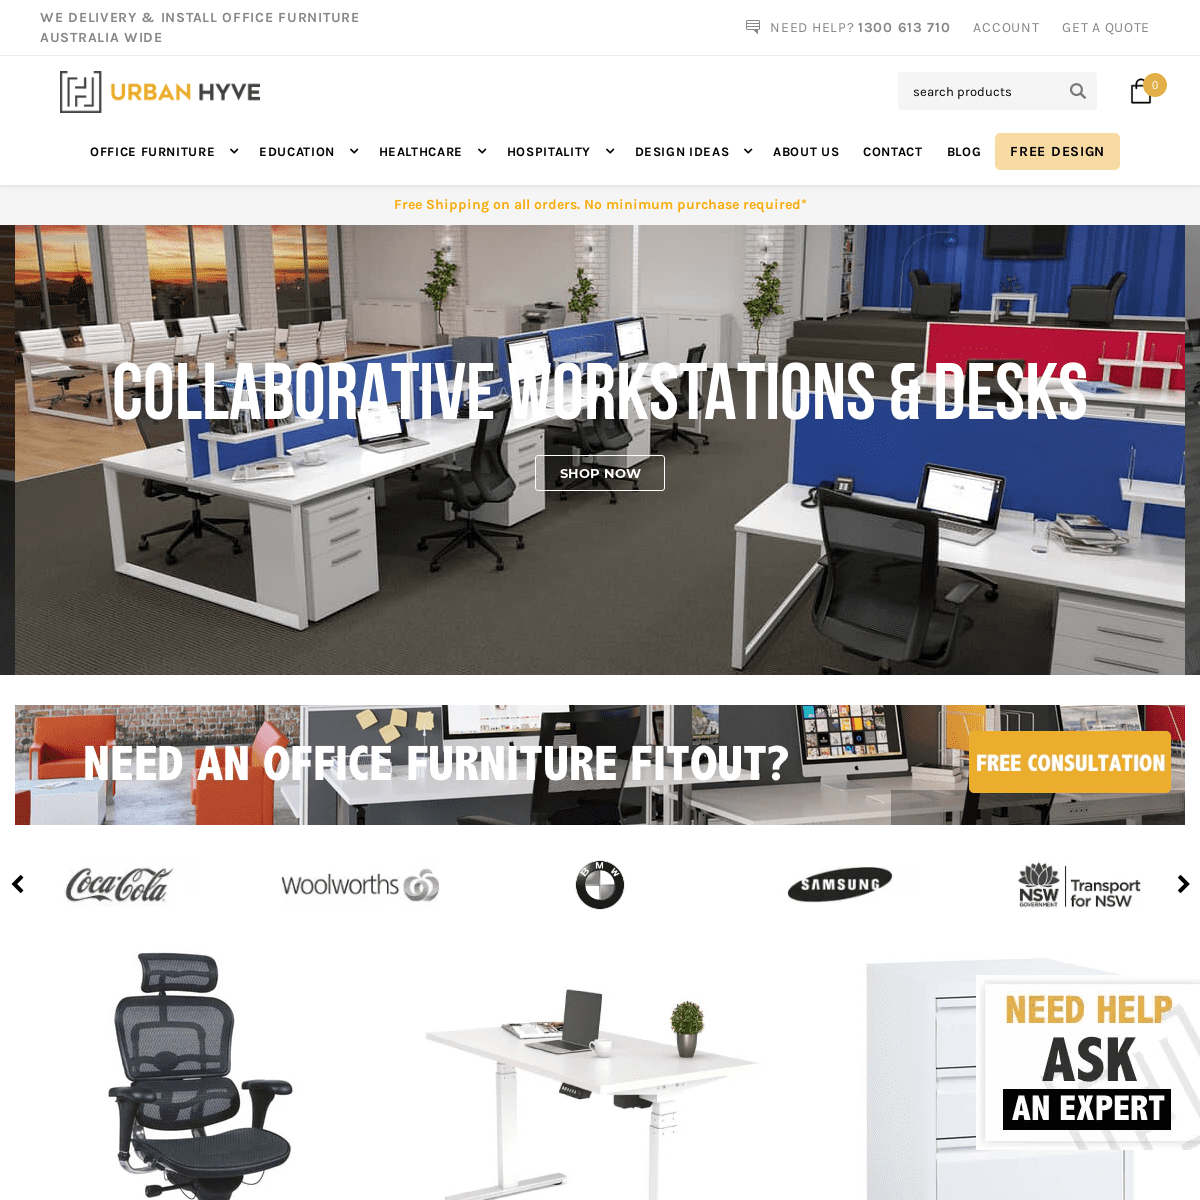 Urban Hyve Office Furniture & Workplace Design Services